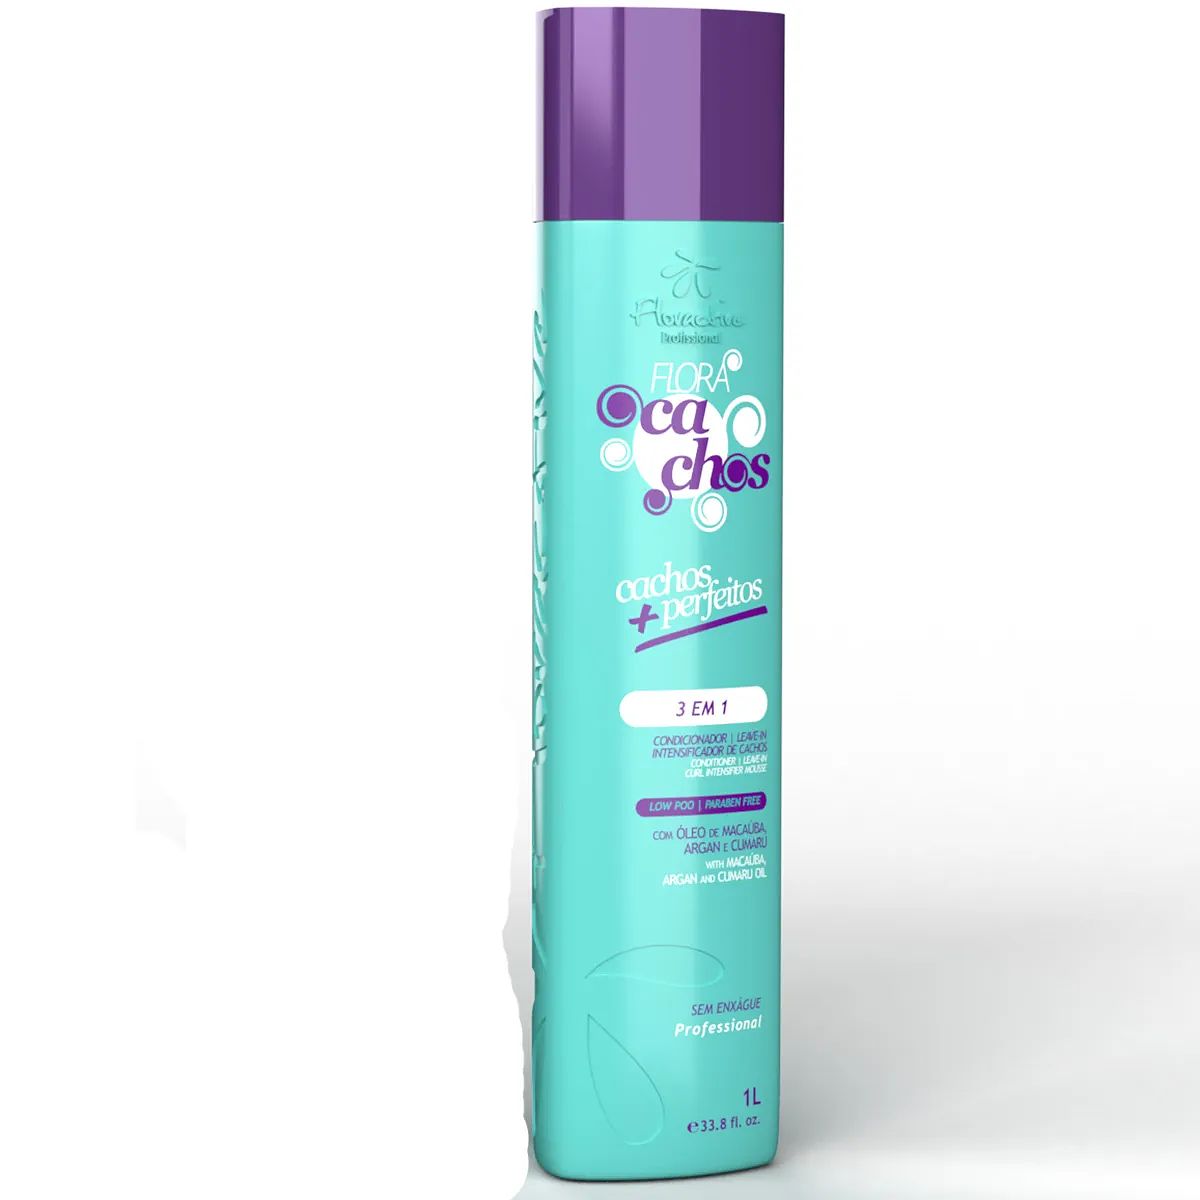 Curly hair care product 3 EM 1 (CONDITIONER